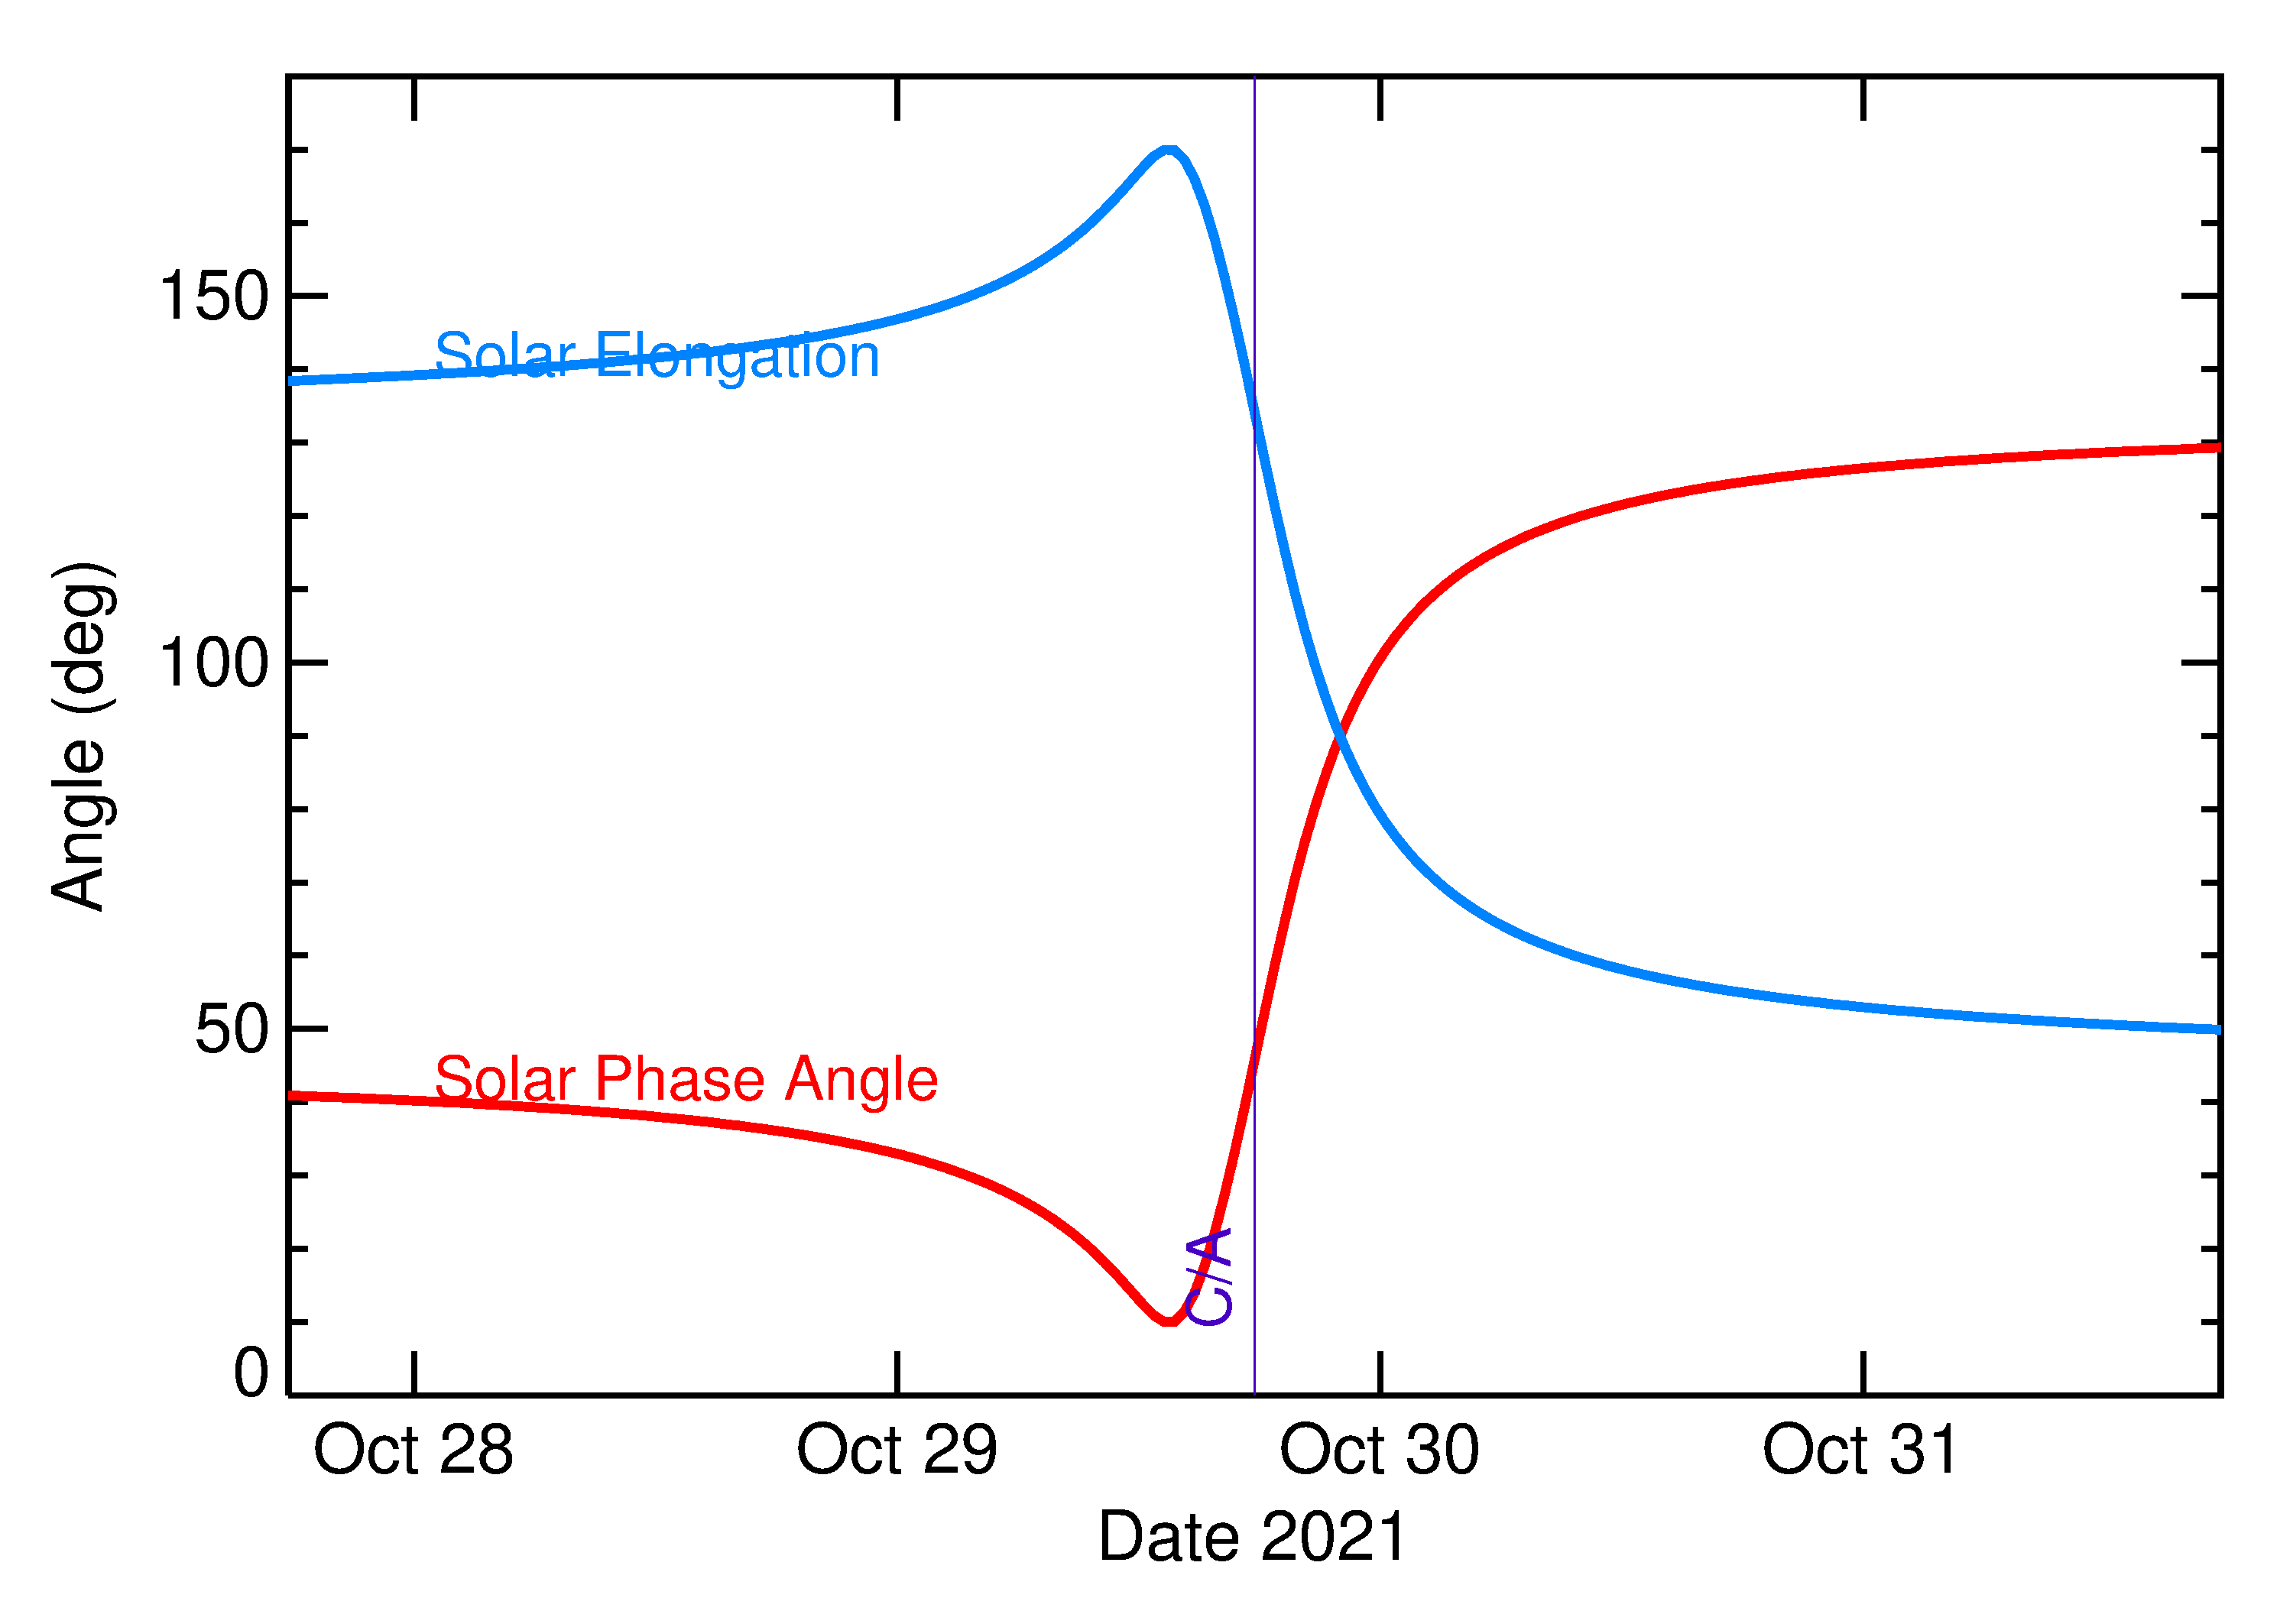 Solar Elongation and Solar Phase Angle of 2021 UF12 in the days around closest approach